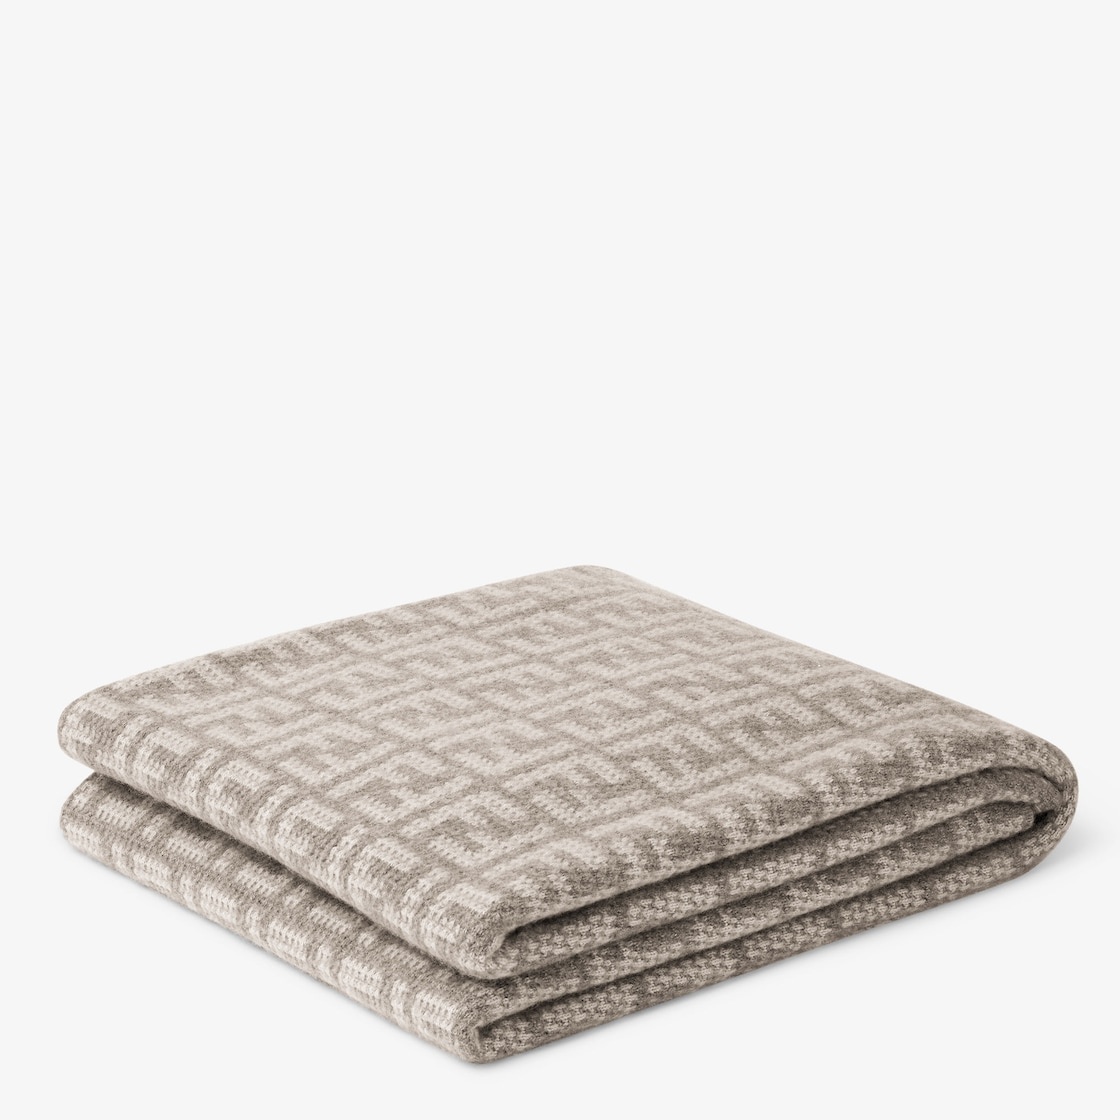 Two-tone soft cashmere blanket with FF motif in natural dove gray and white tones. Designed by Karl  - 1